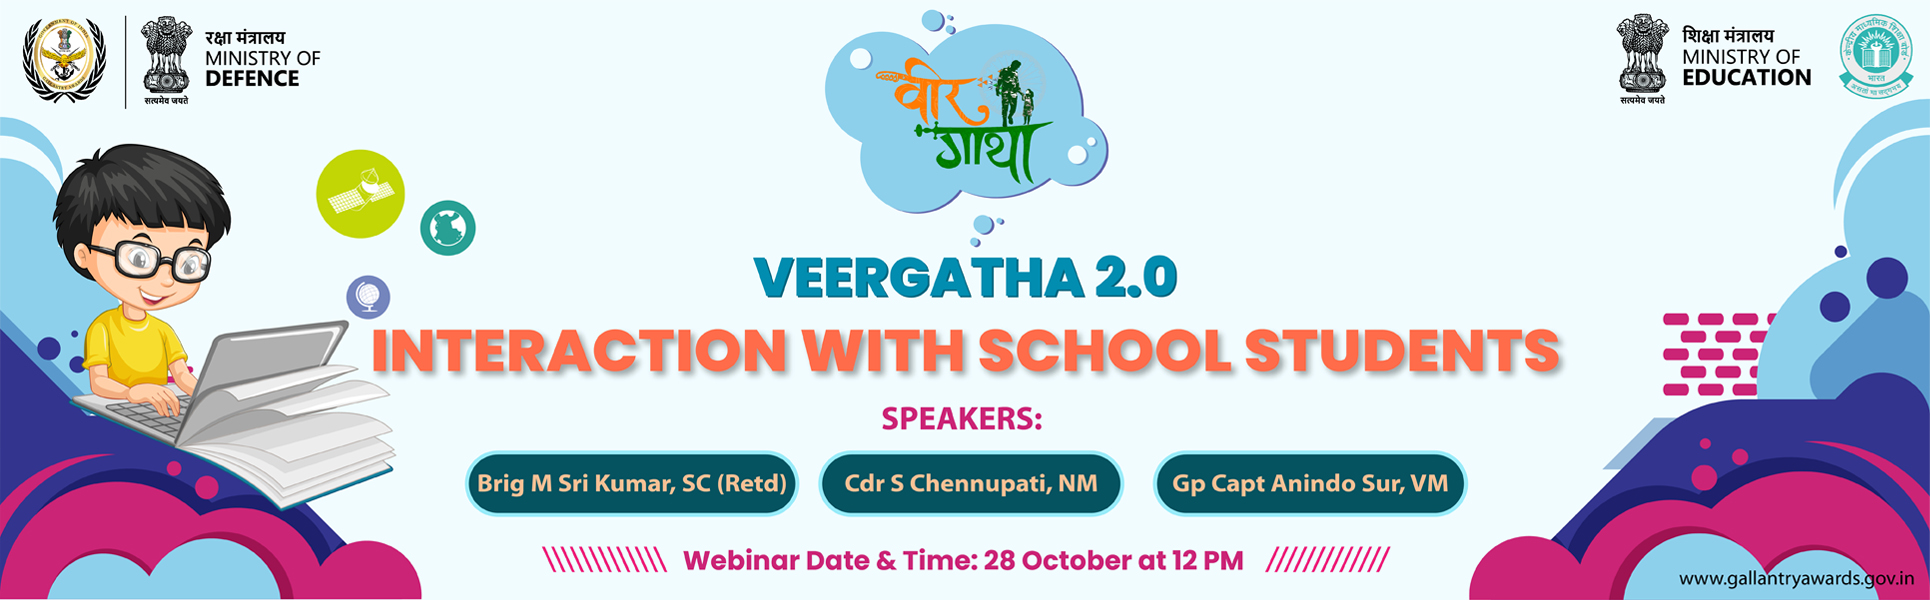 VeerGatha 2.0 , Interaction with School Students